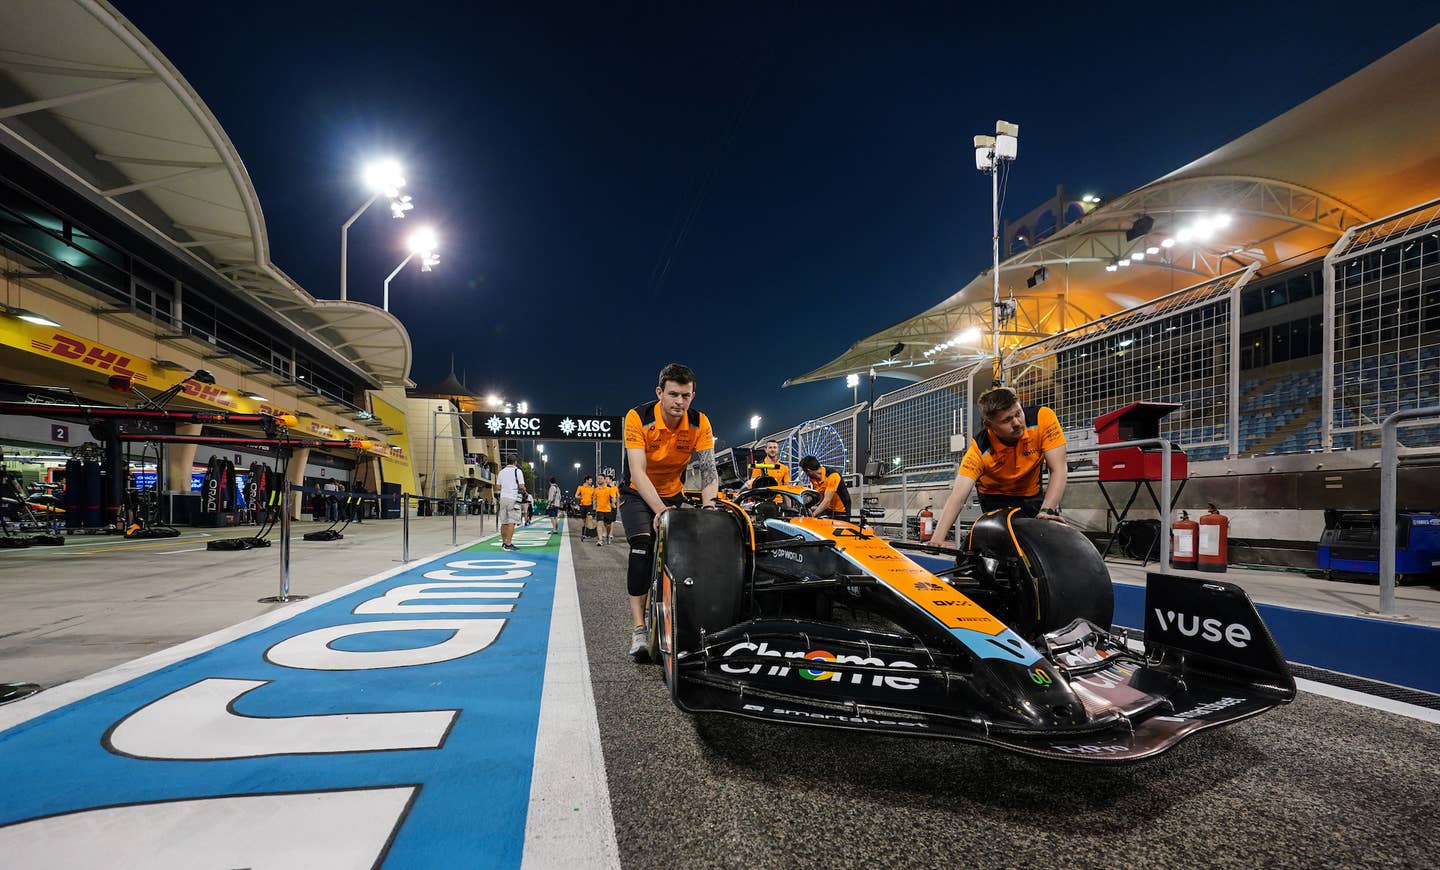 McLaren mechanics with Lando Norris' car during preview day of the Bahrain Grand Prix at the Bahrain International Circuit, Sakhir. Picture date: Thursday March 2, 2023. (Photo by David Davies/PA Images via Getty Images)